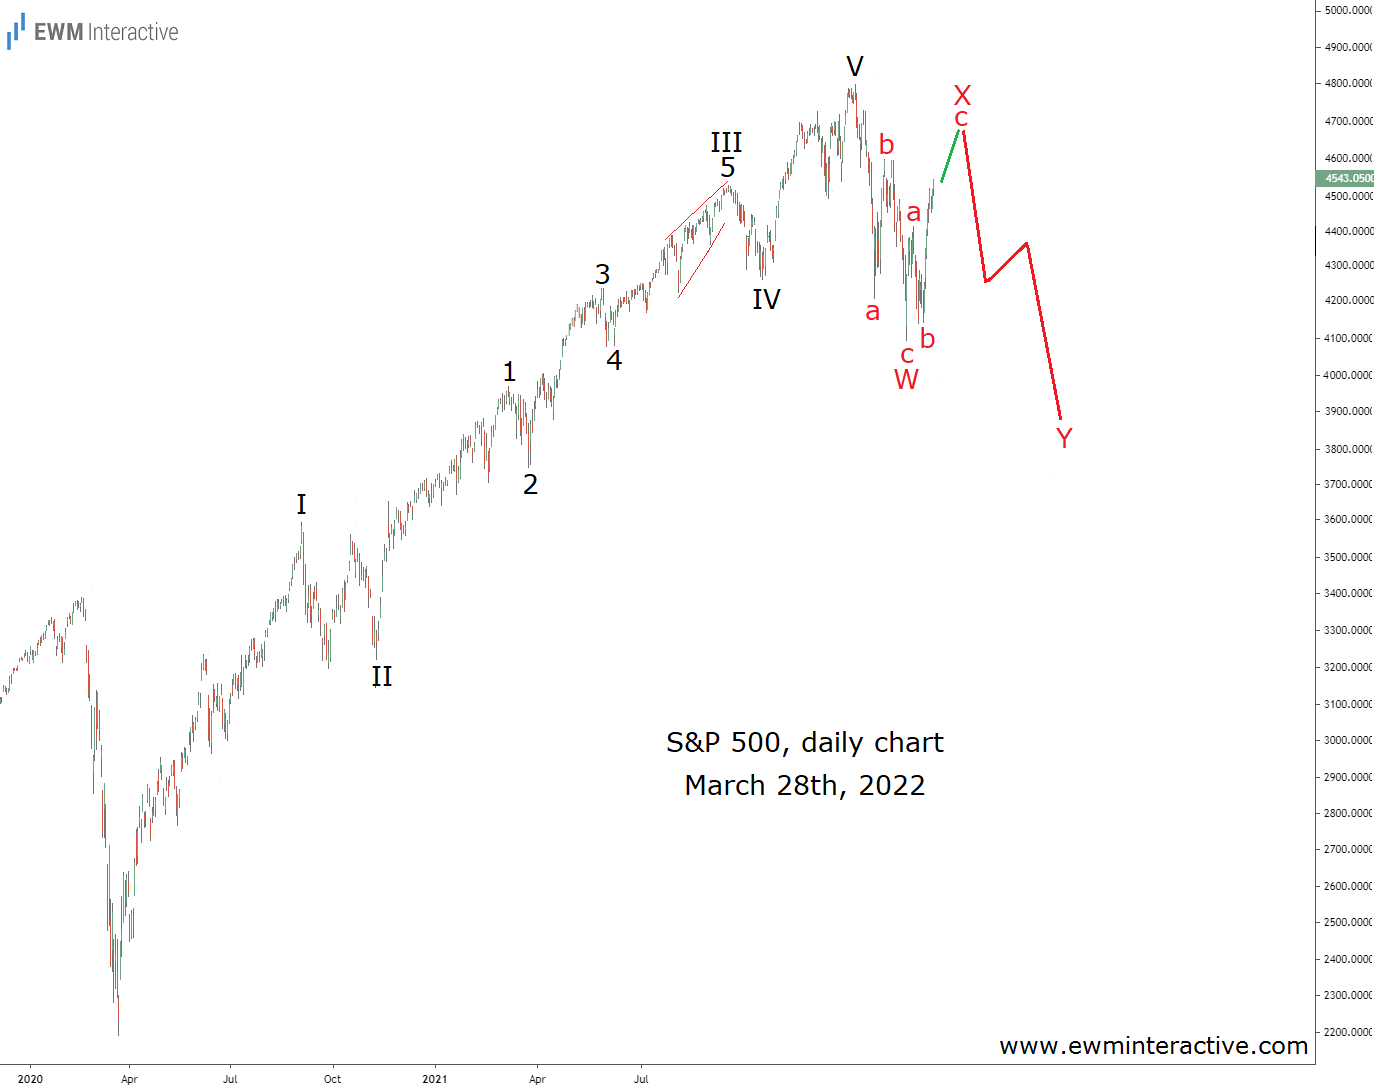 S&P 500 Daily Chart - Mar. 28, 2022